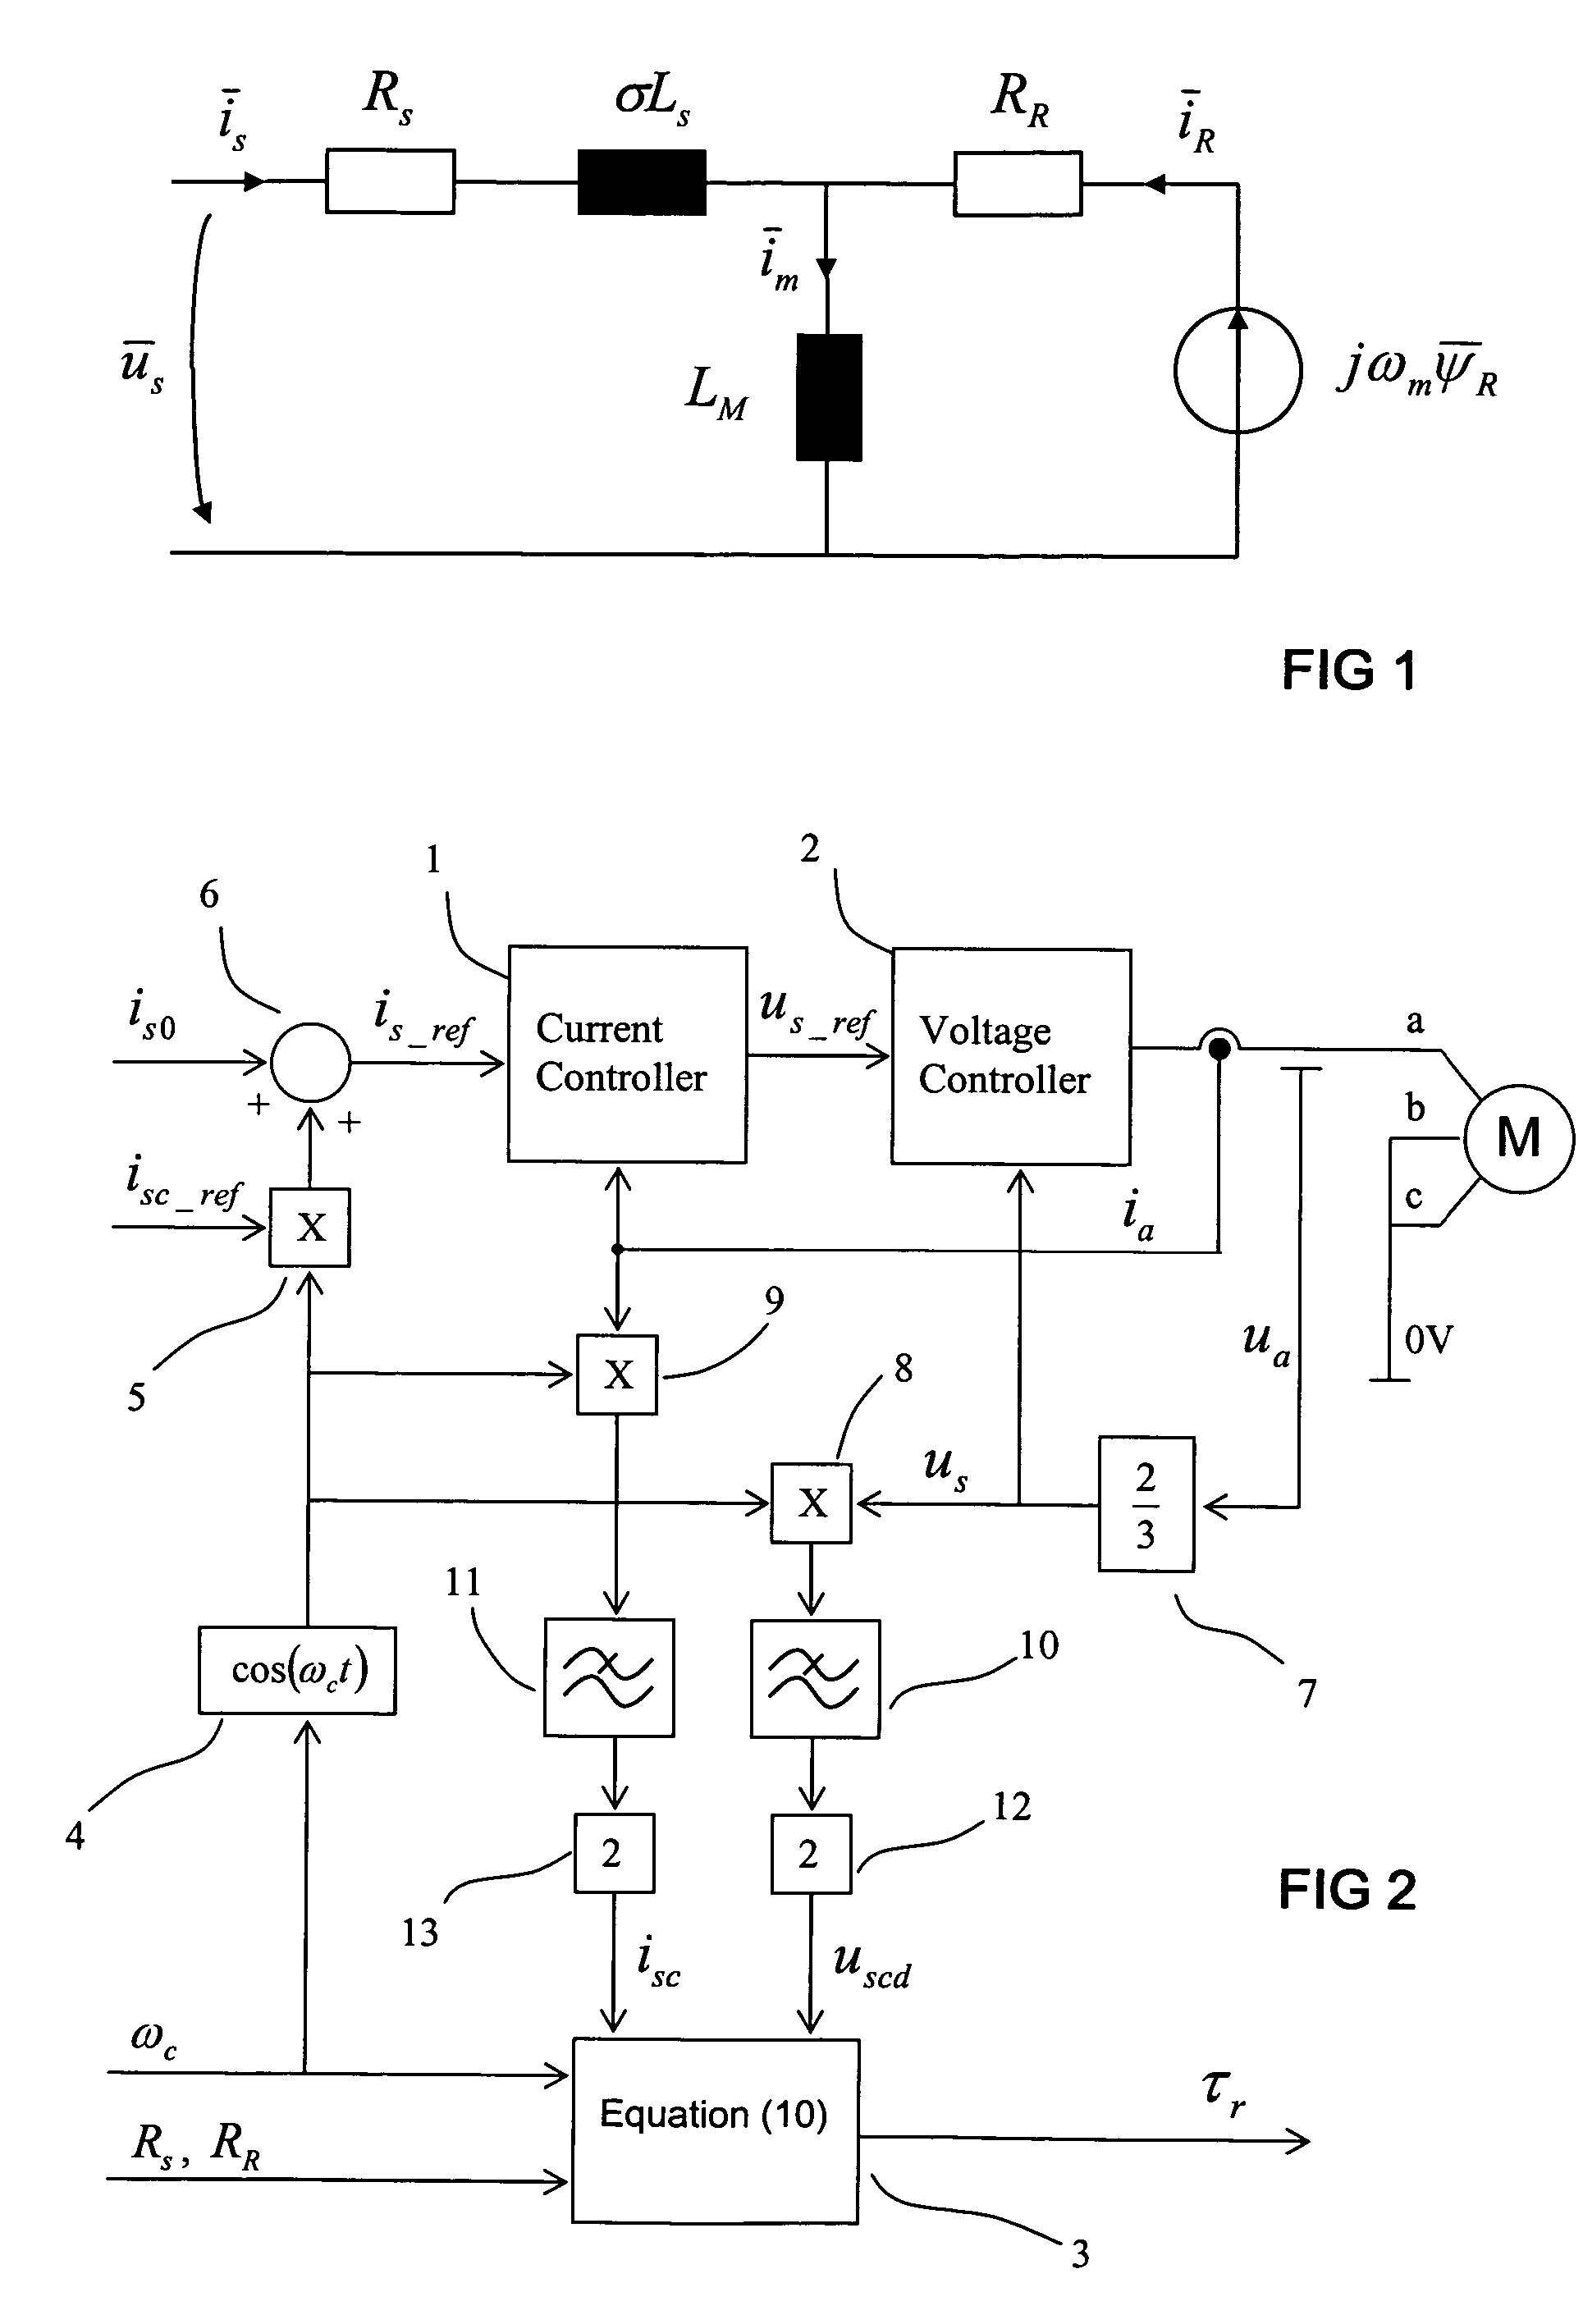 Method for estimating the rotor time constant of an induction machine